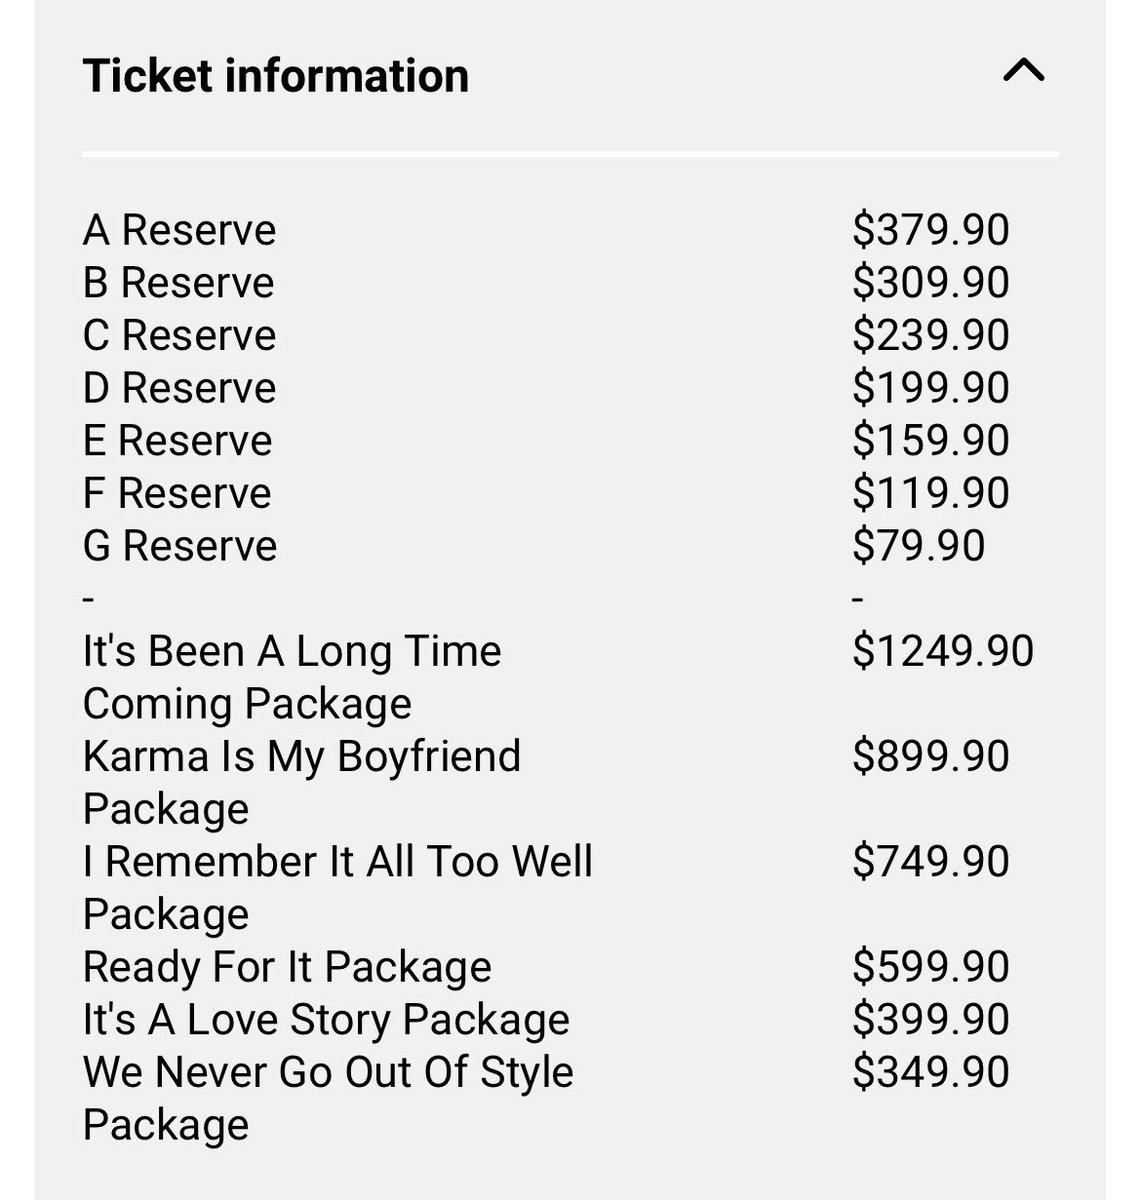 Average price of Taylor Swift ticket - $352.75

Average price of A-League membership - $142.50

I know what I'd choose.